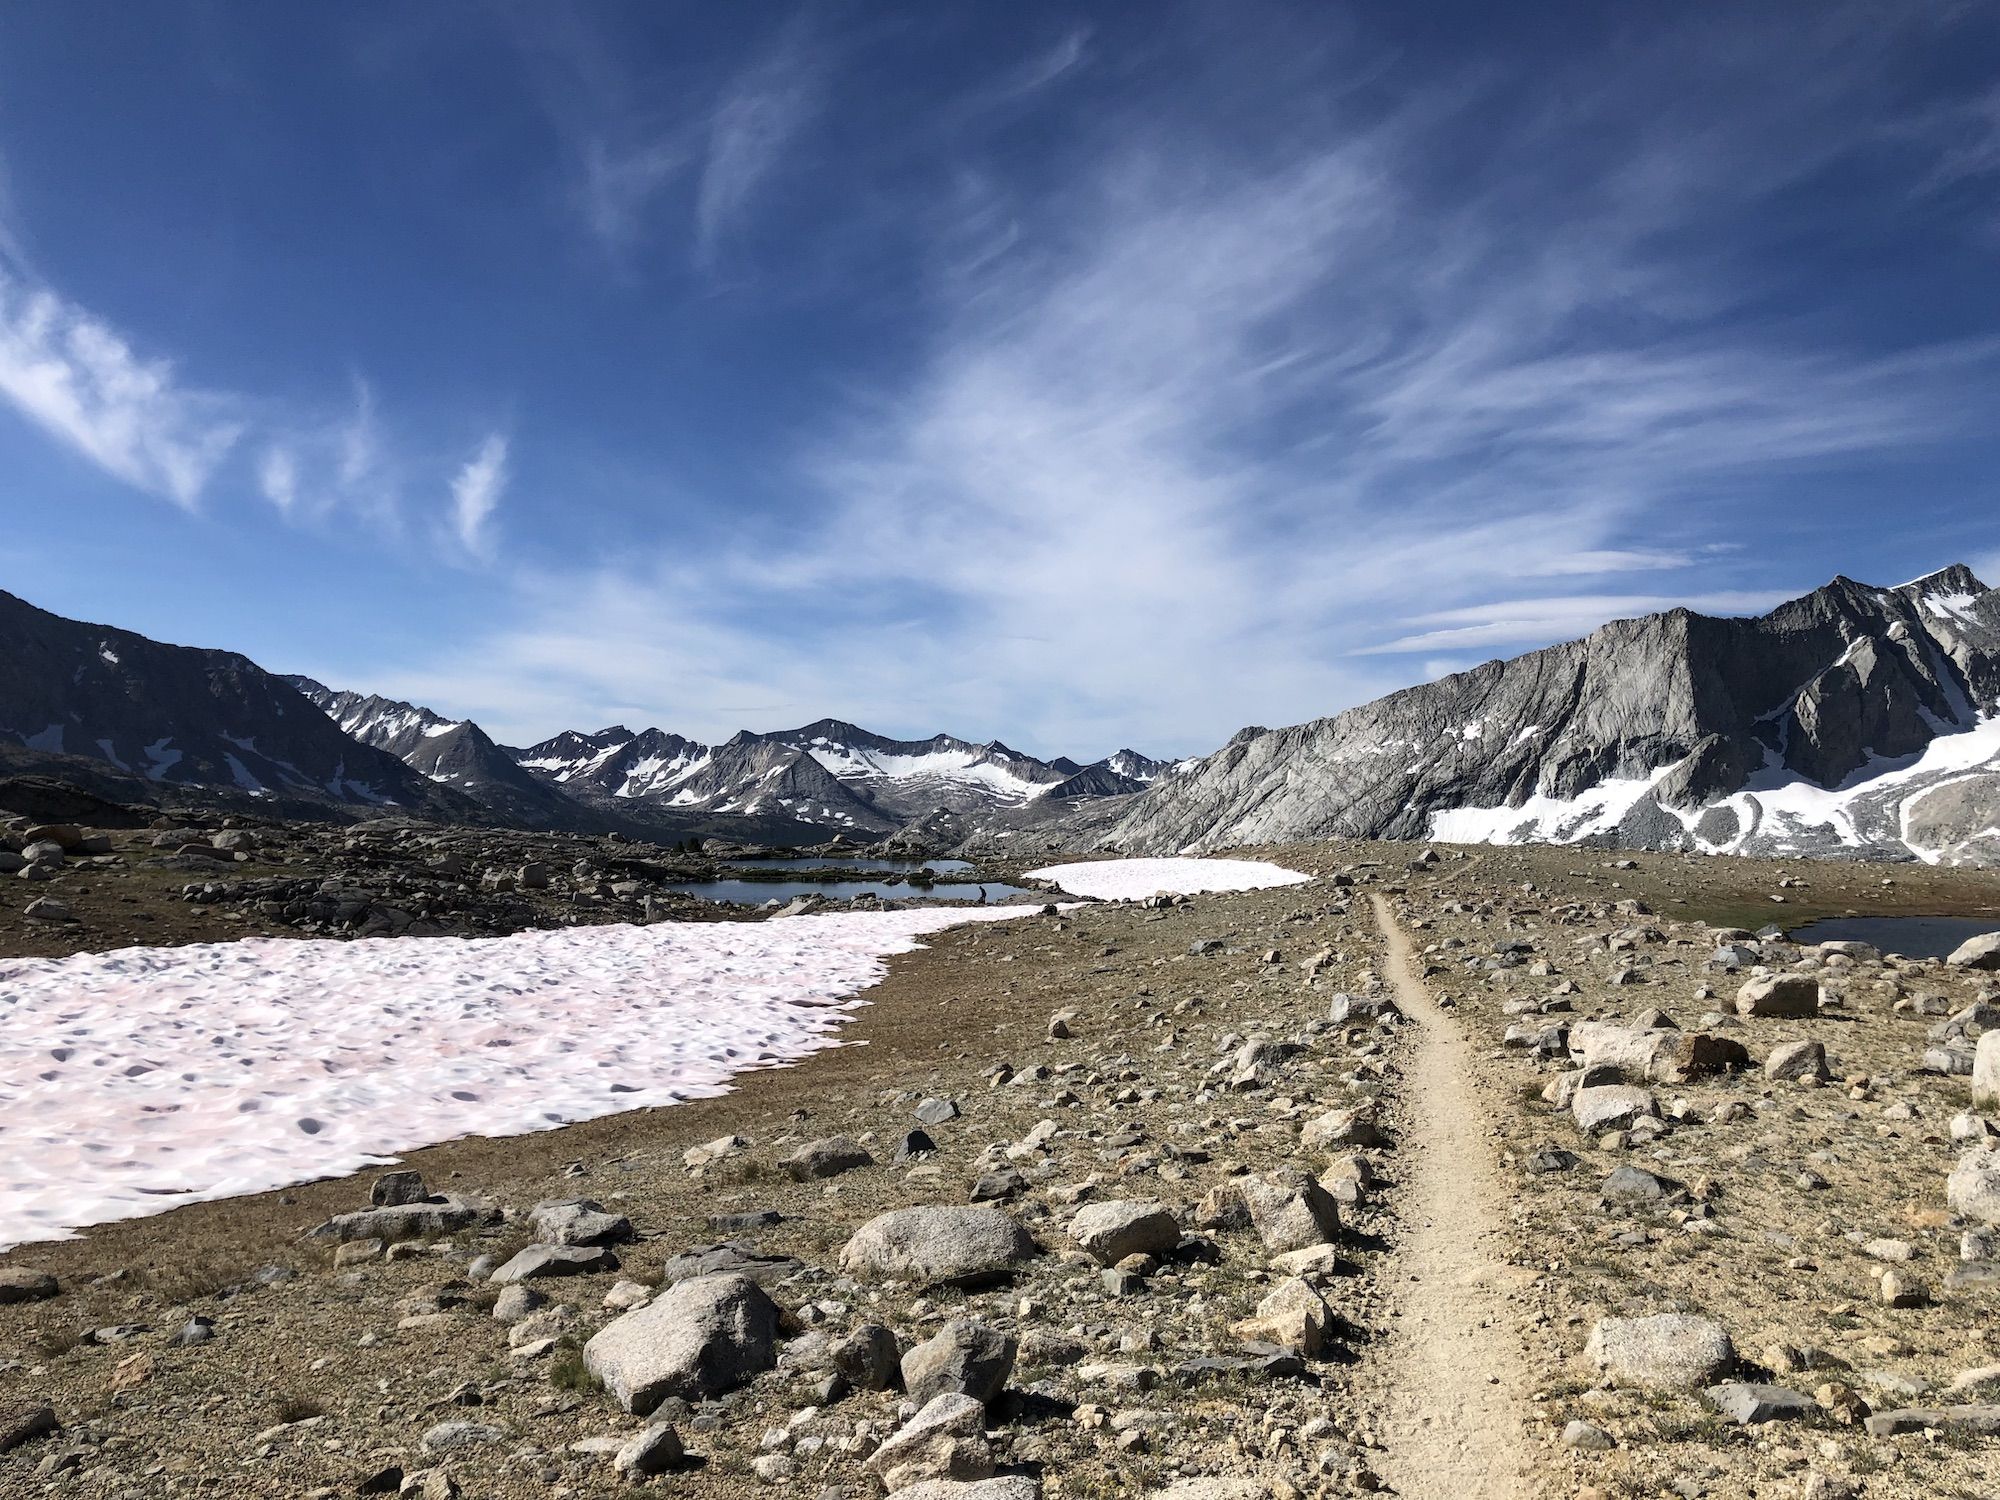 A dirt path going through a rocky landscape with small snow patches.